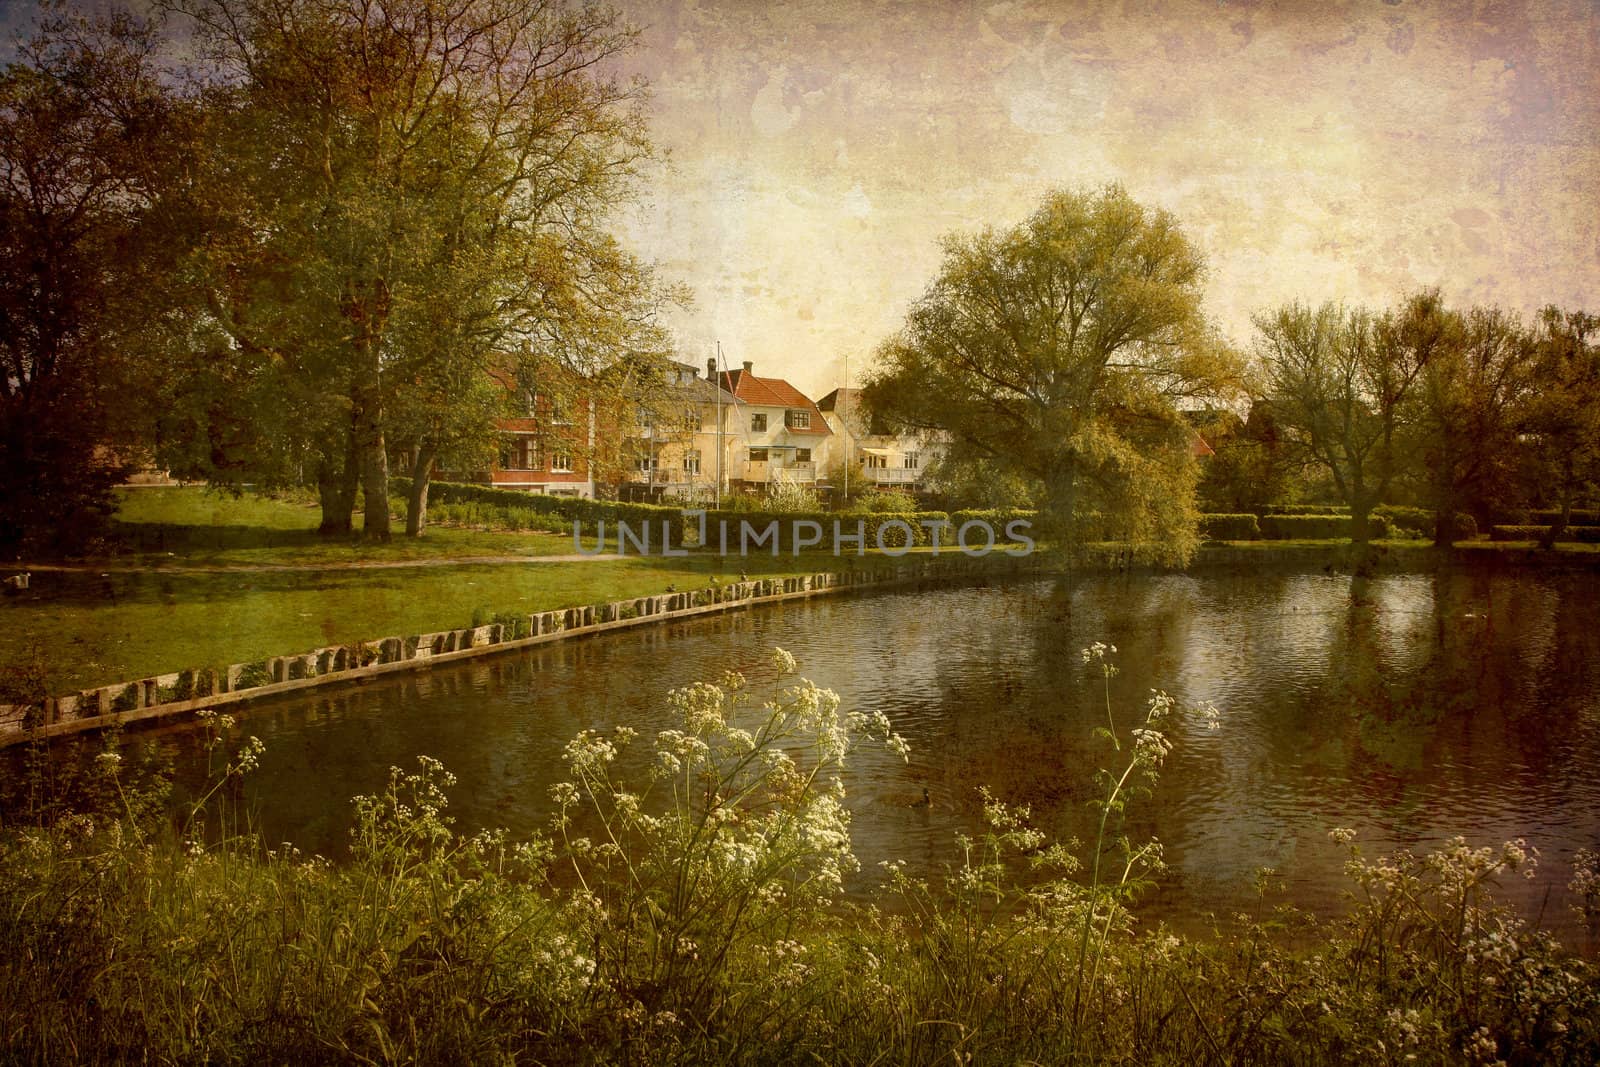 Artistic work of my own in retro style - Postcard from Denmark. - Morning by the moat. More of my images worked together to reflect age and time.